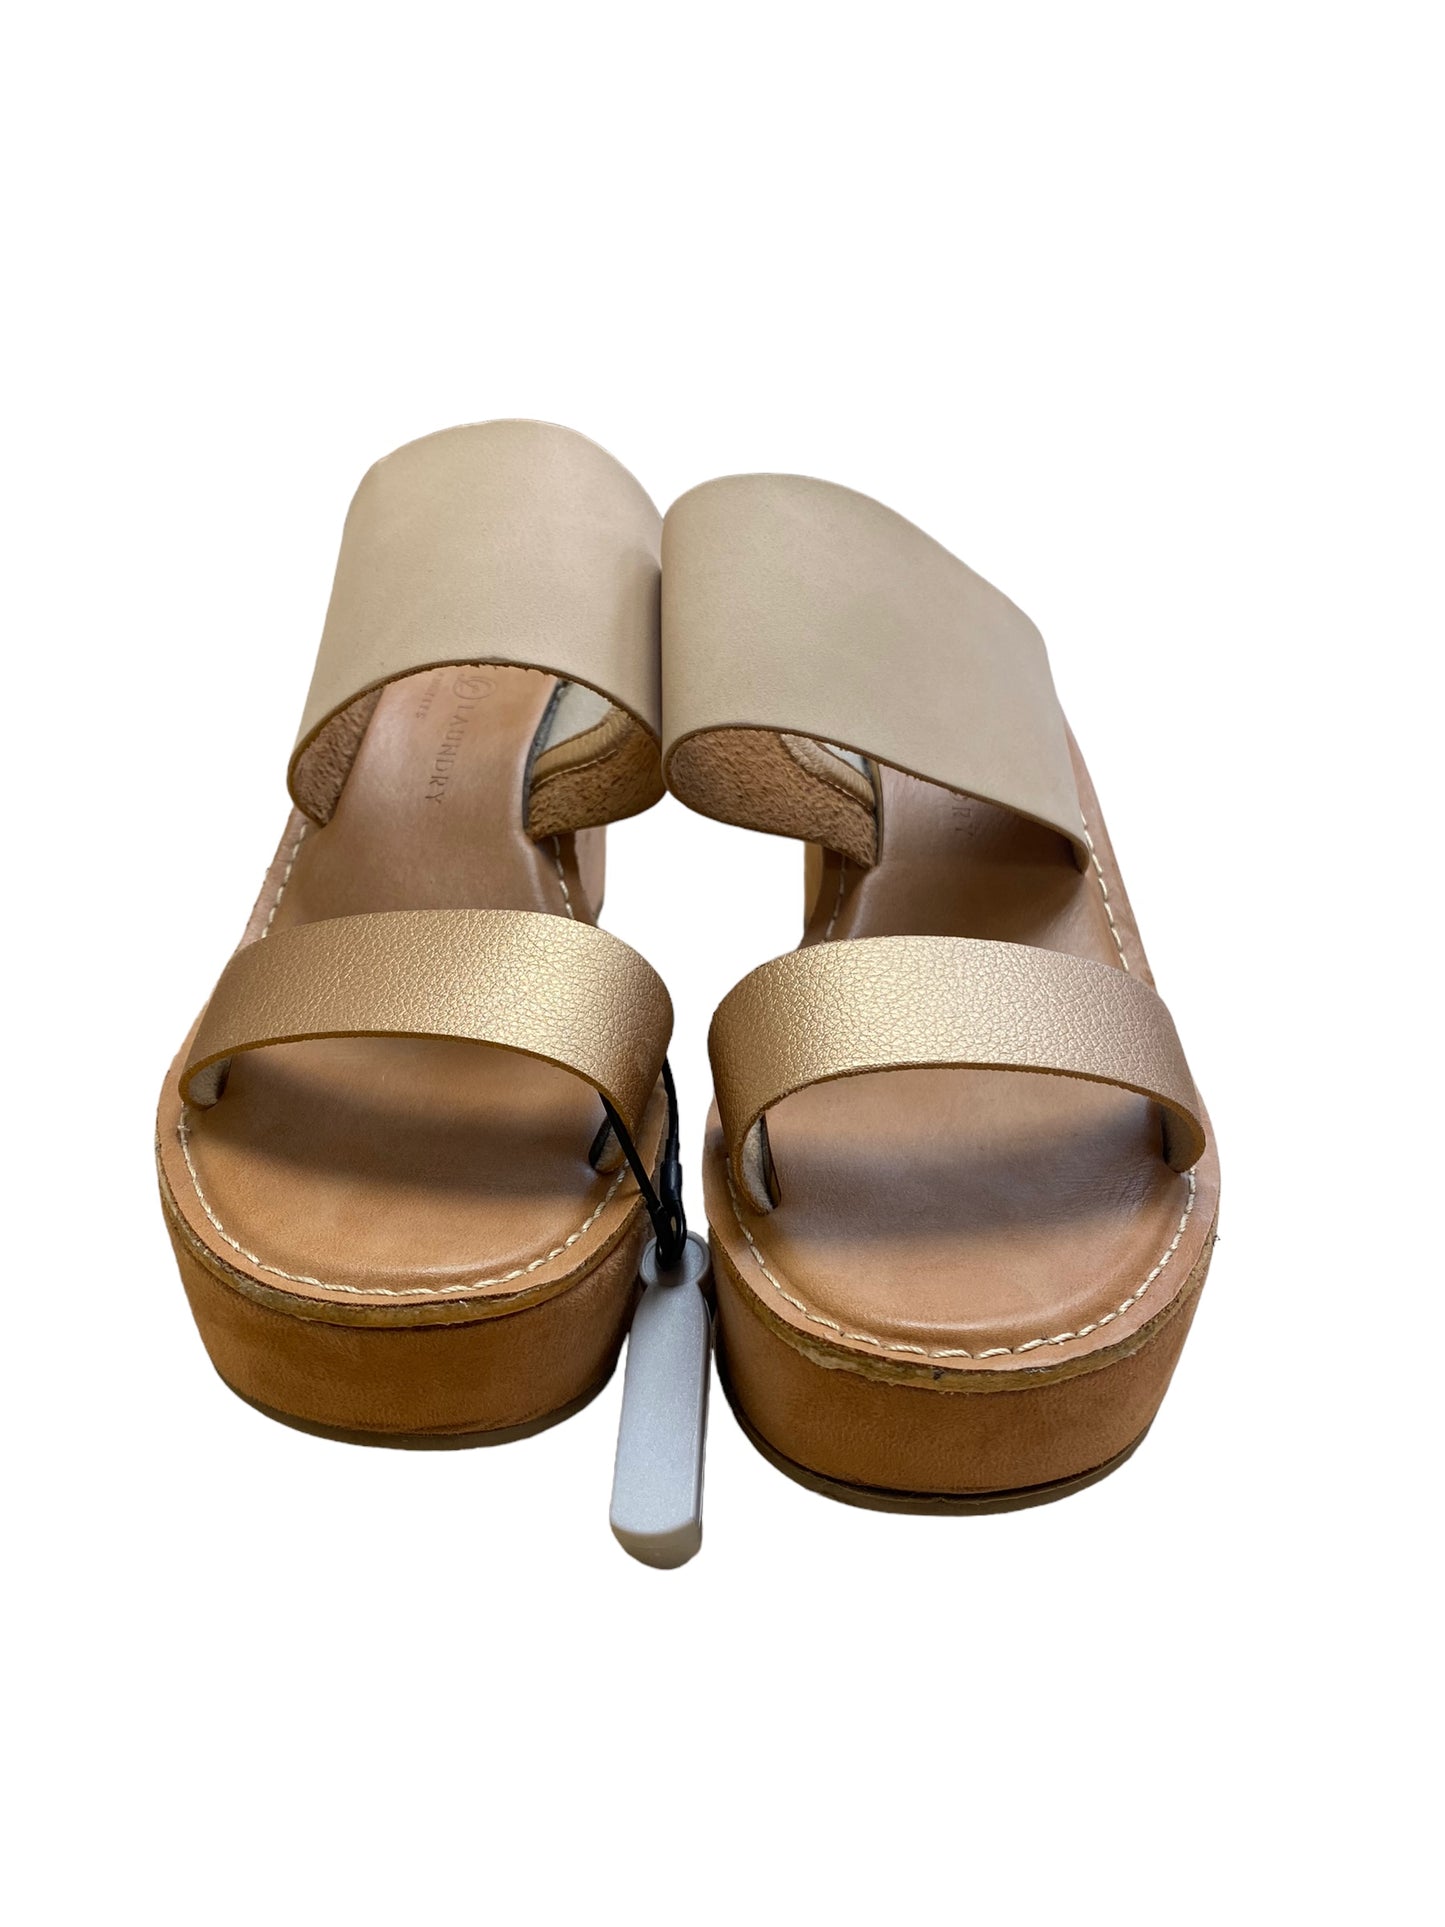 Sandals Heels Wedge By Chinese Laundry  Size: 9